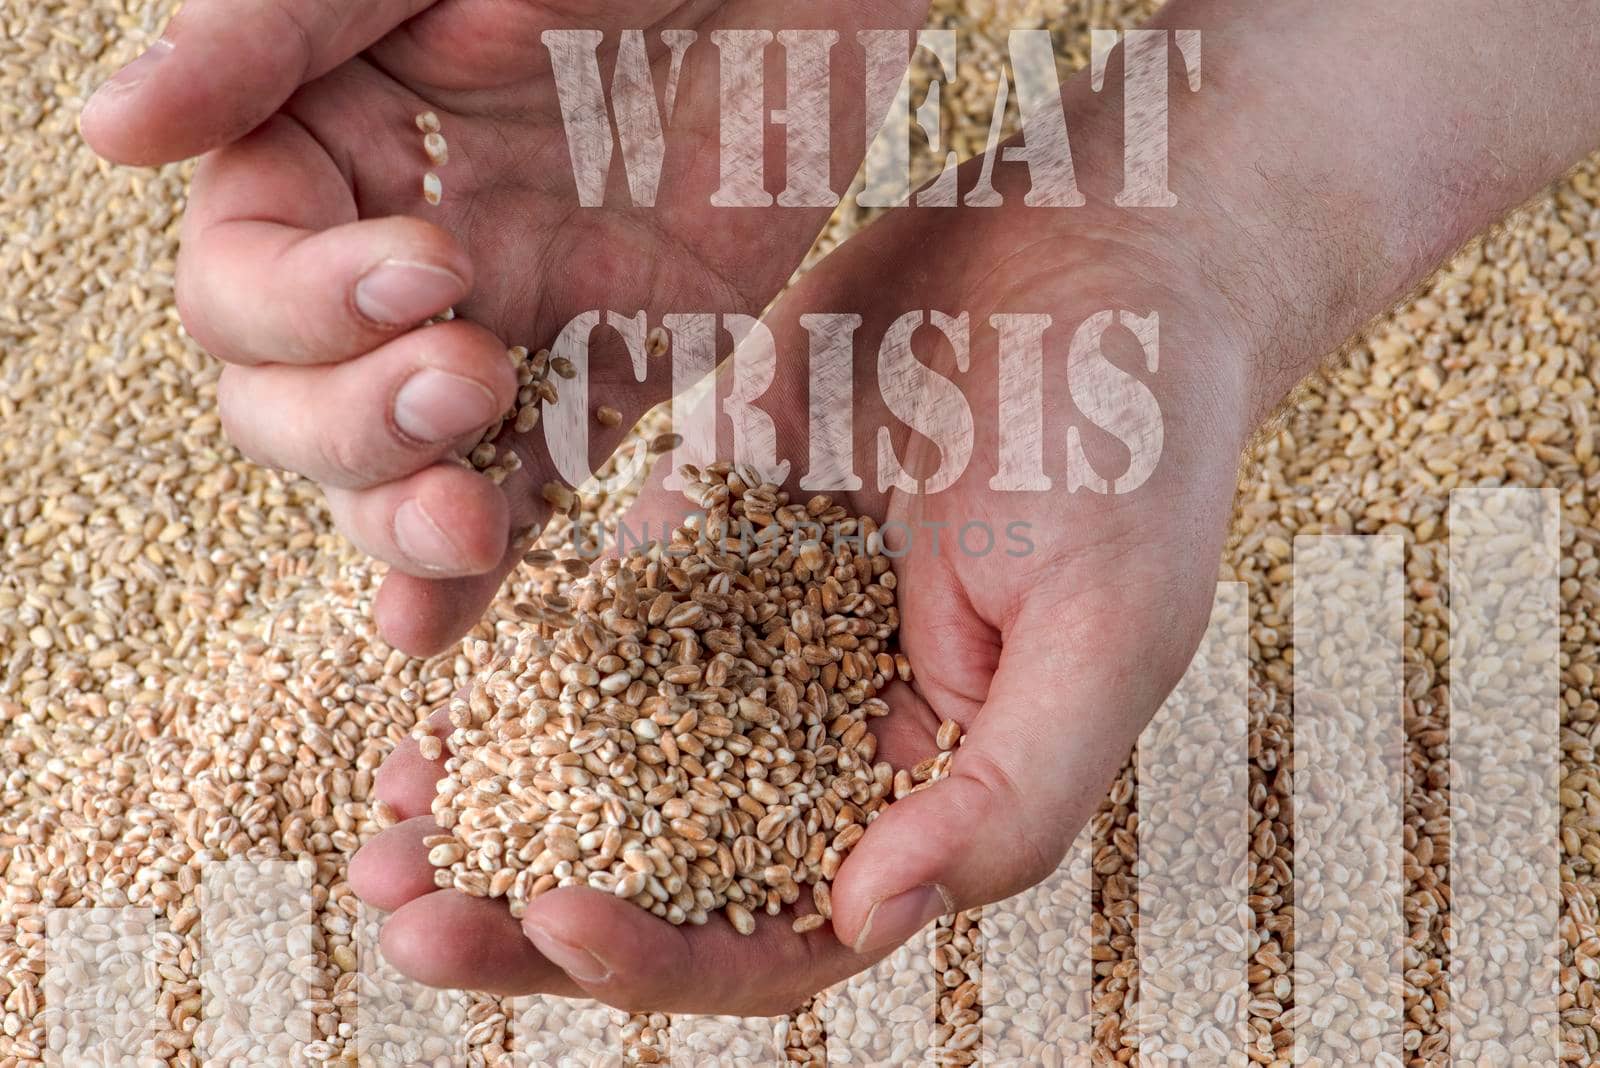 Wheat crisis, lack of grain and crops. Grains of wheat in the hand, against the background of the granary. The concept of the world food crisis. export and import. by SERSOL